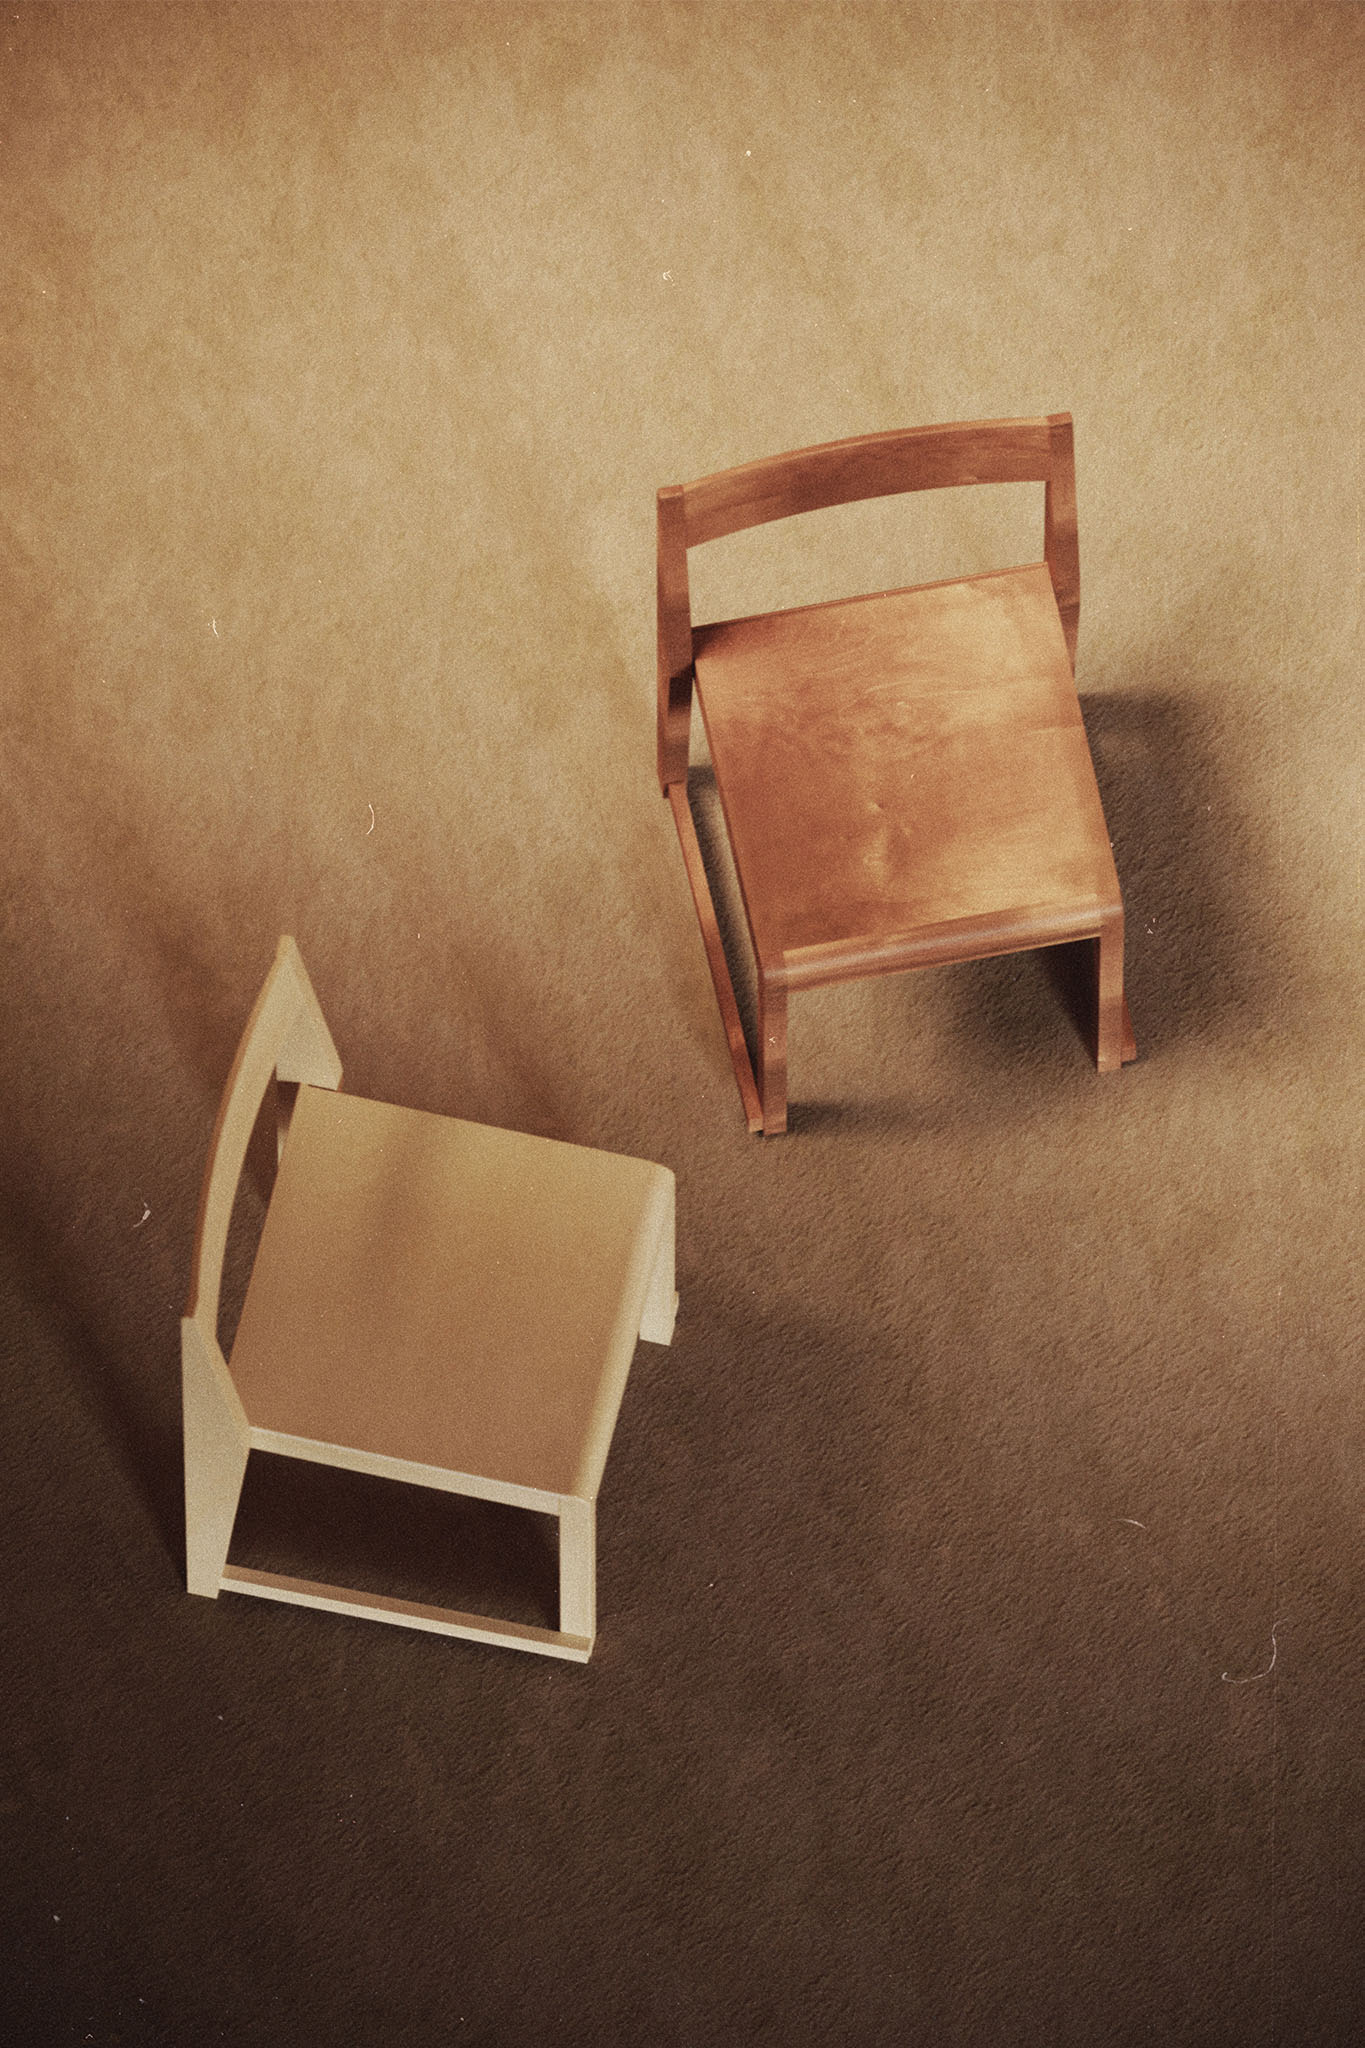 Frama Chair 01 in Warm Brown and Natural Oil. Image by Frama